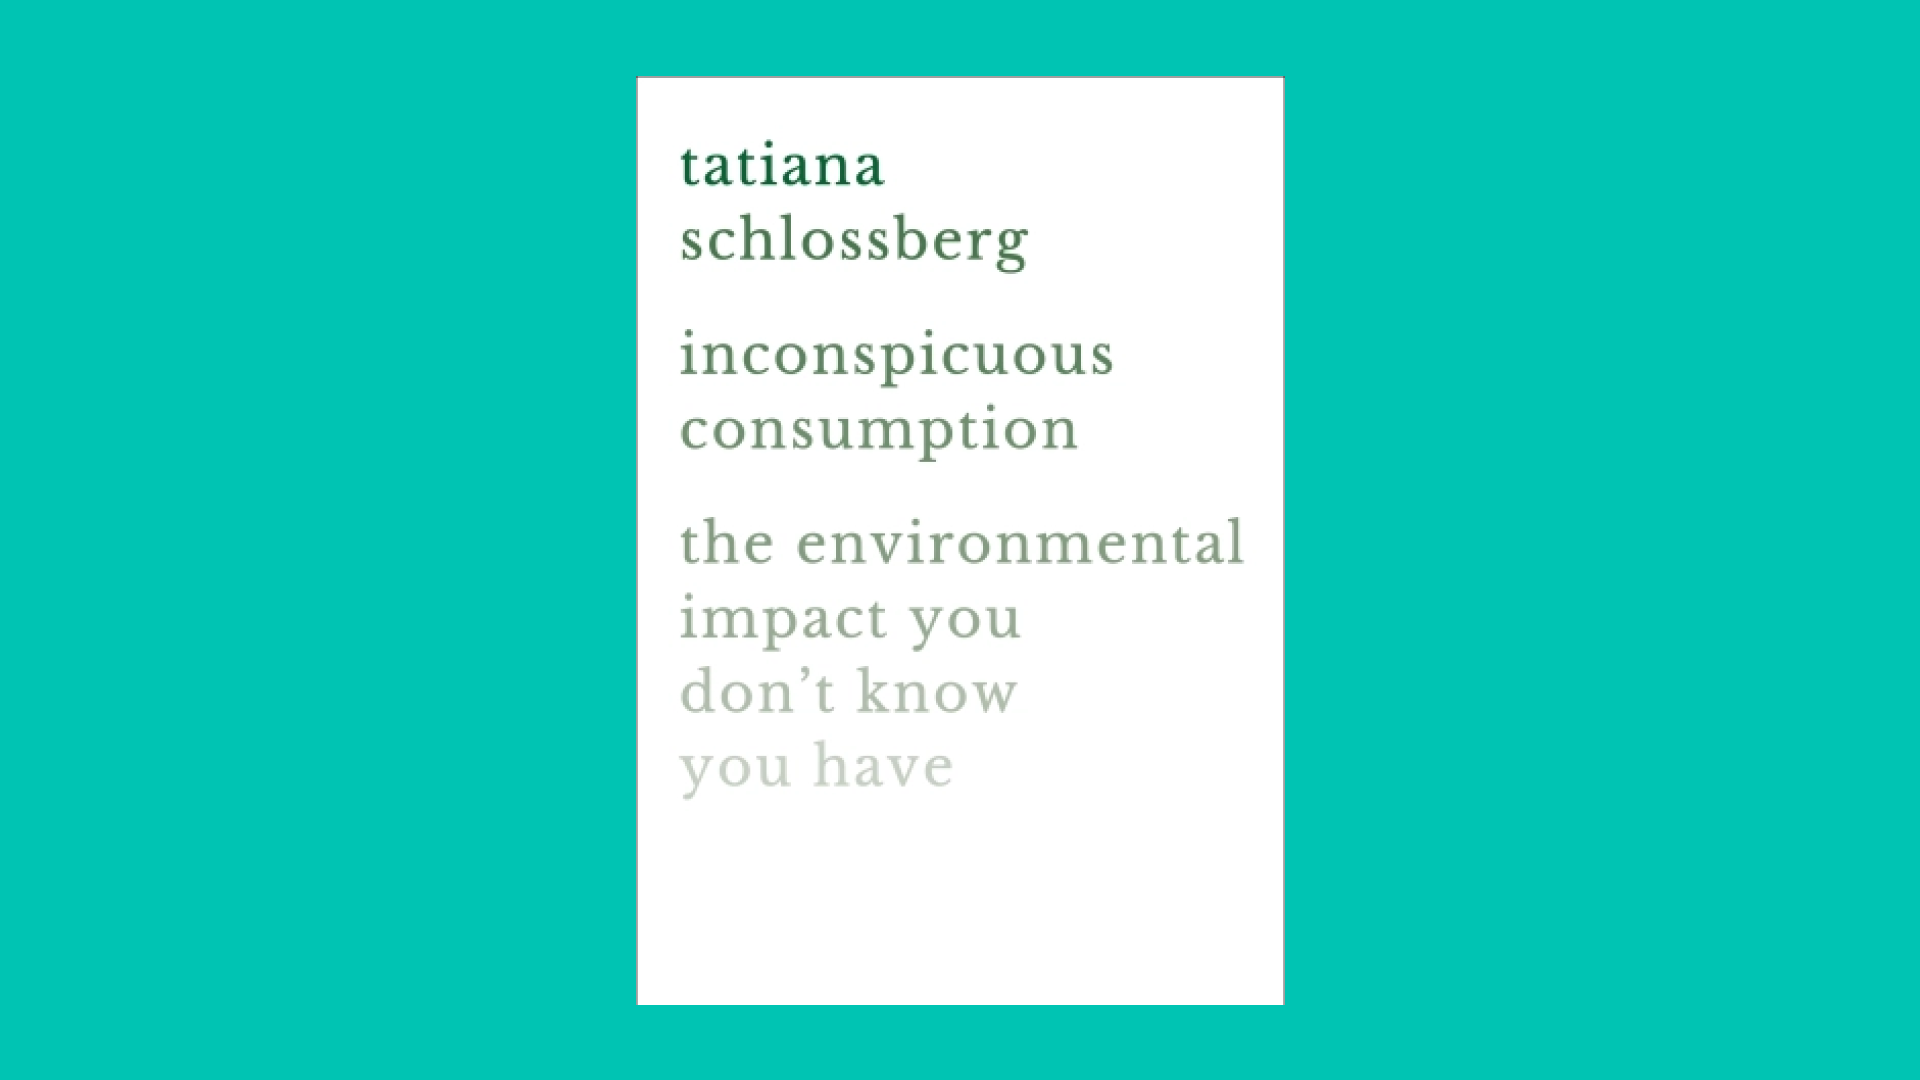 “Inconspicuous Consumption” by Tatiana Schlossberg